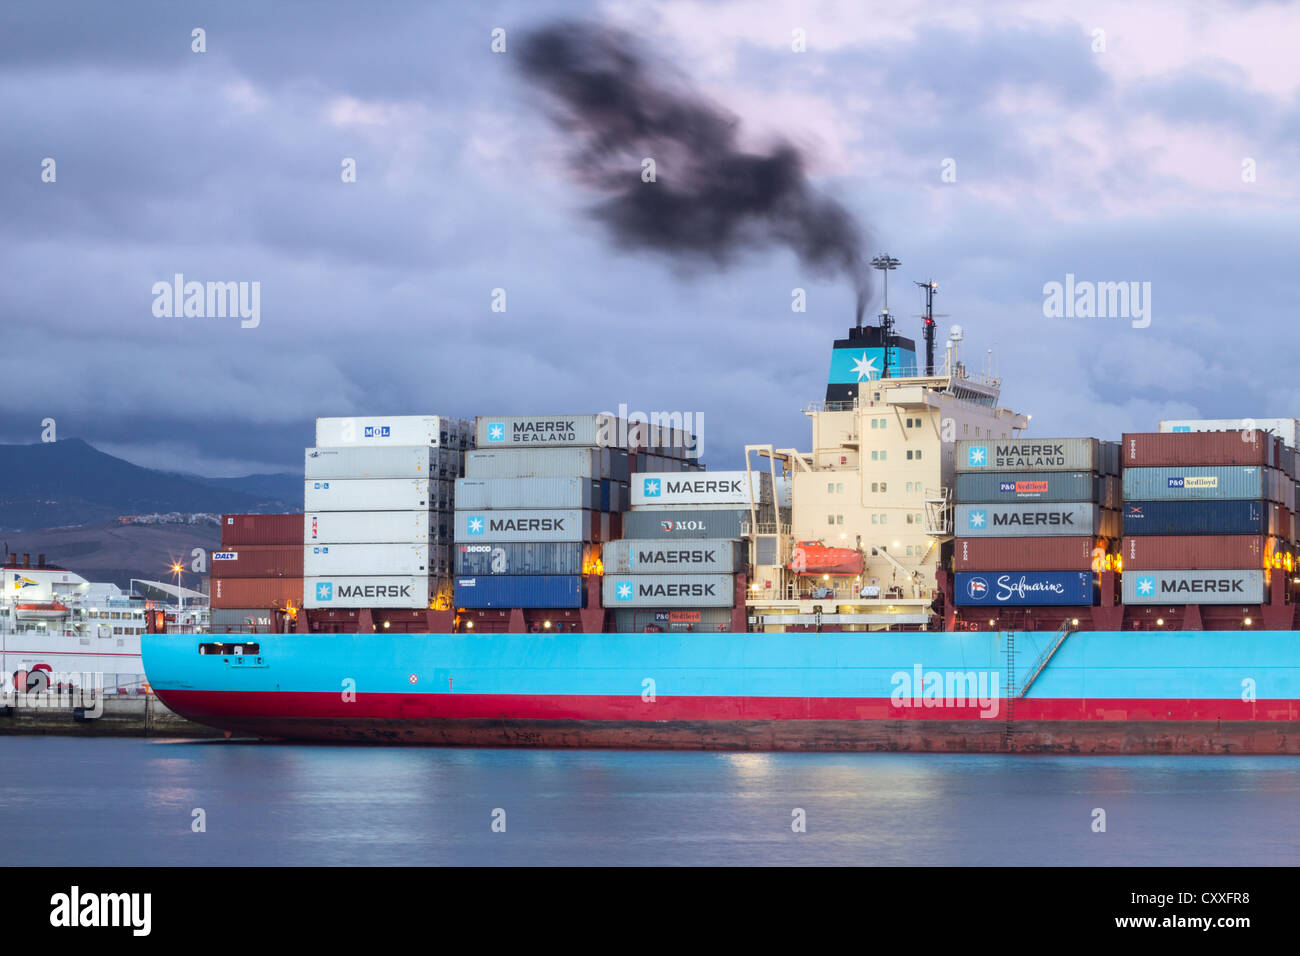 Black smoke from Maersk Line container ship funnel Stock Photo